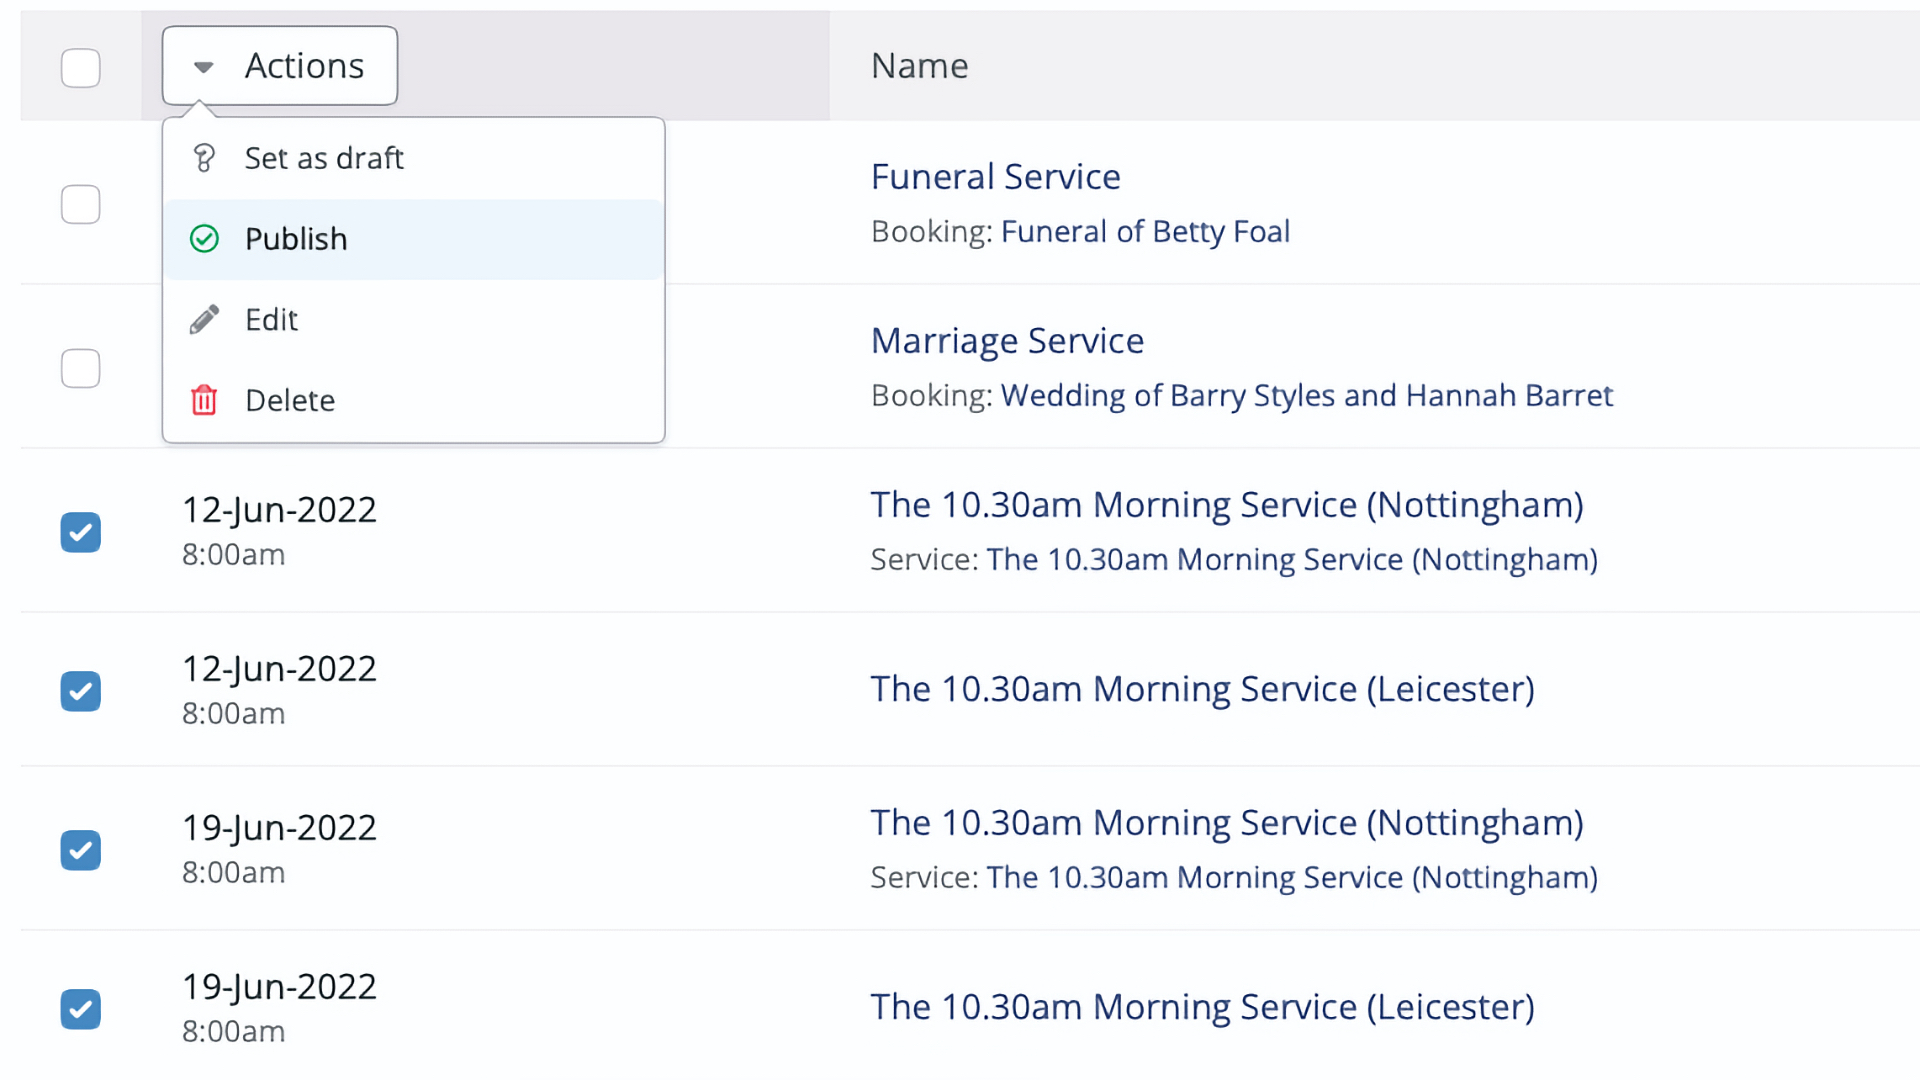 Publish multiple service plans at once with batch actions in ChurchSuite